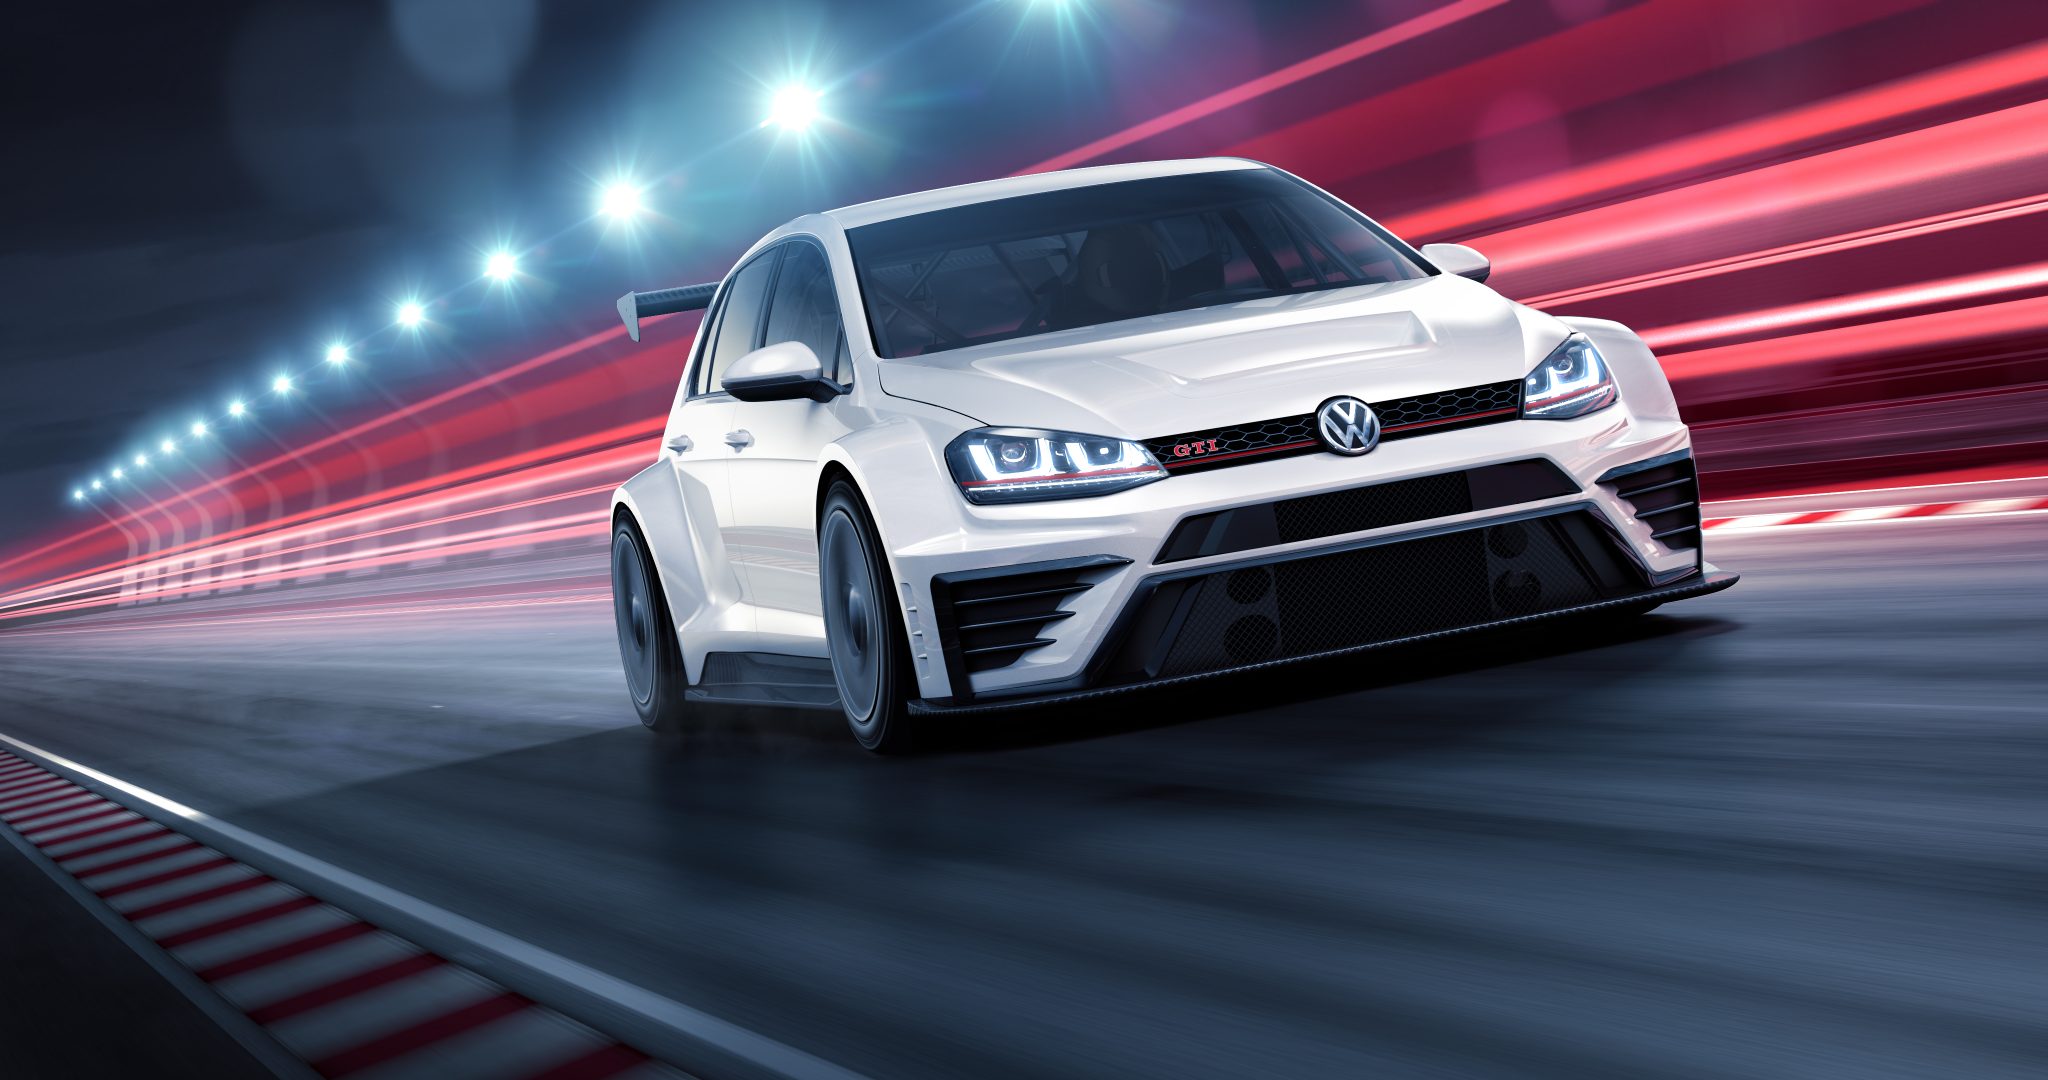 Volkswagen Introduces the Golf GTI TCR Racecar